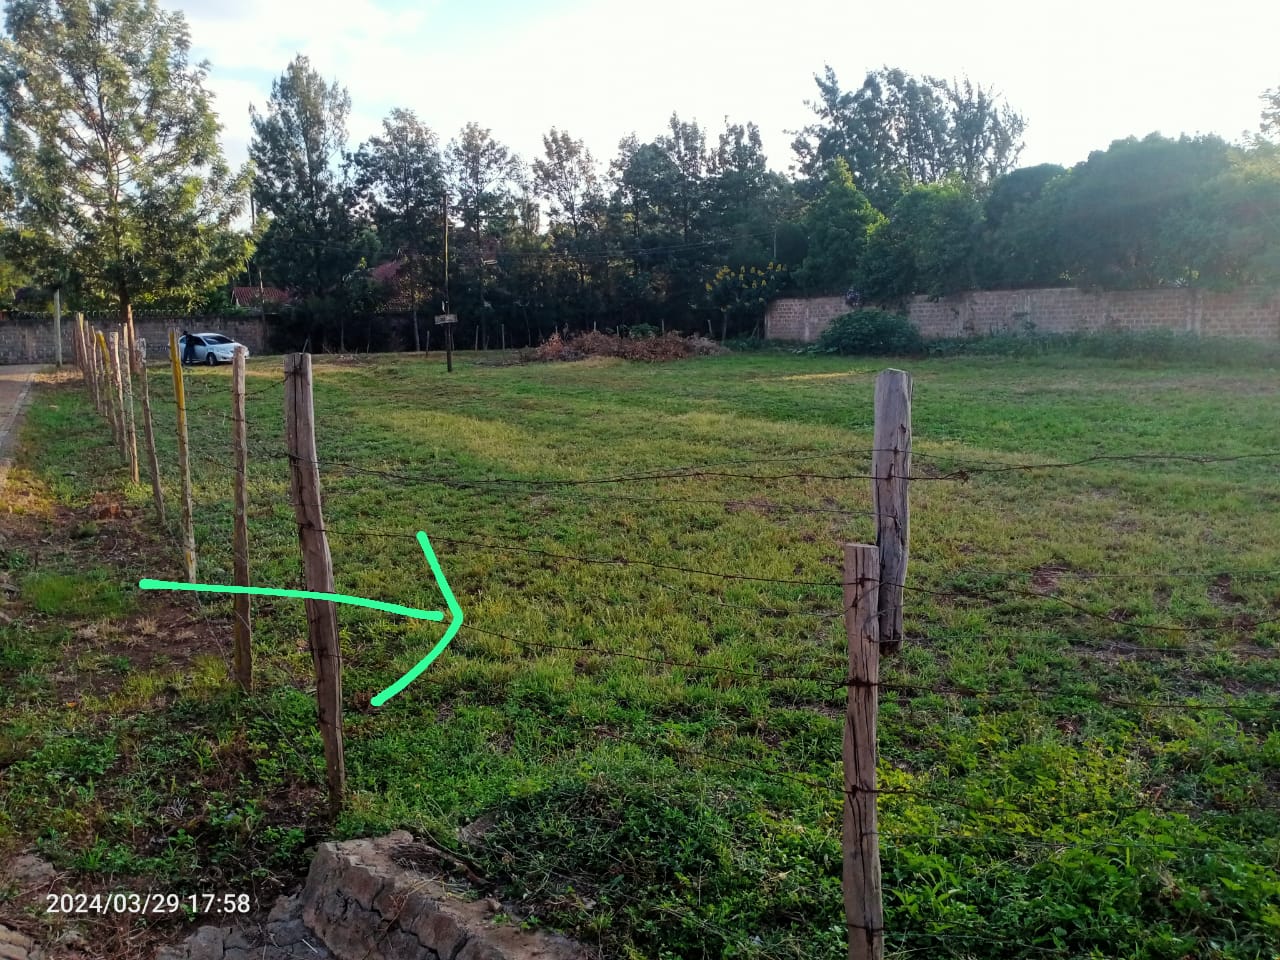 Rich 0.5 Acre Land For Sale in Safari Park. Situated in a Gated community, Red soil, Corner plot andTouching 2 roads. Asking Price. 45M. Musilli Homes.